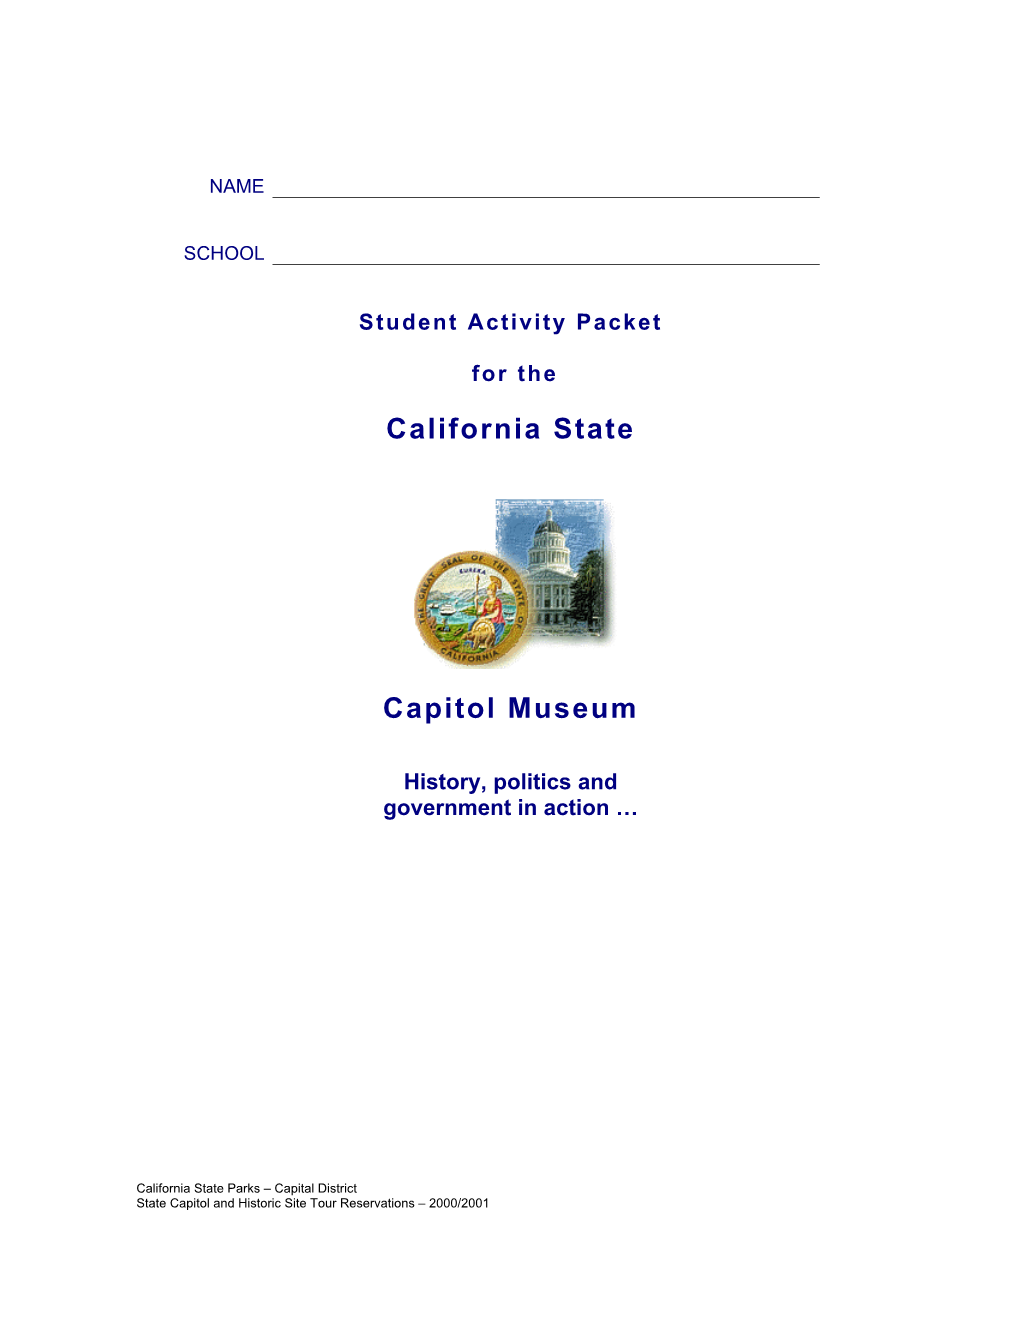 California State Capitol Museum Student Activity Sheet